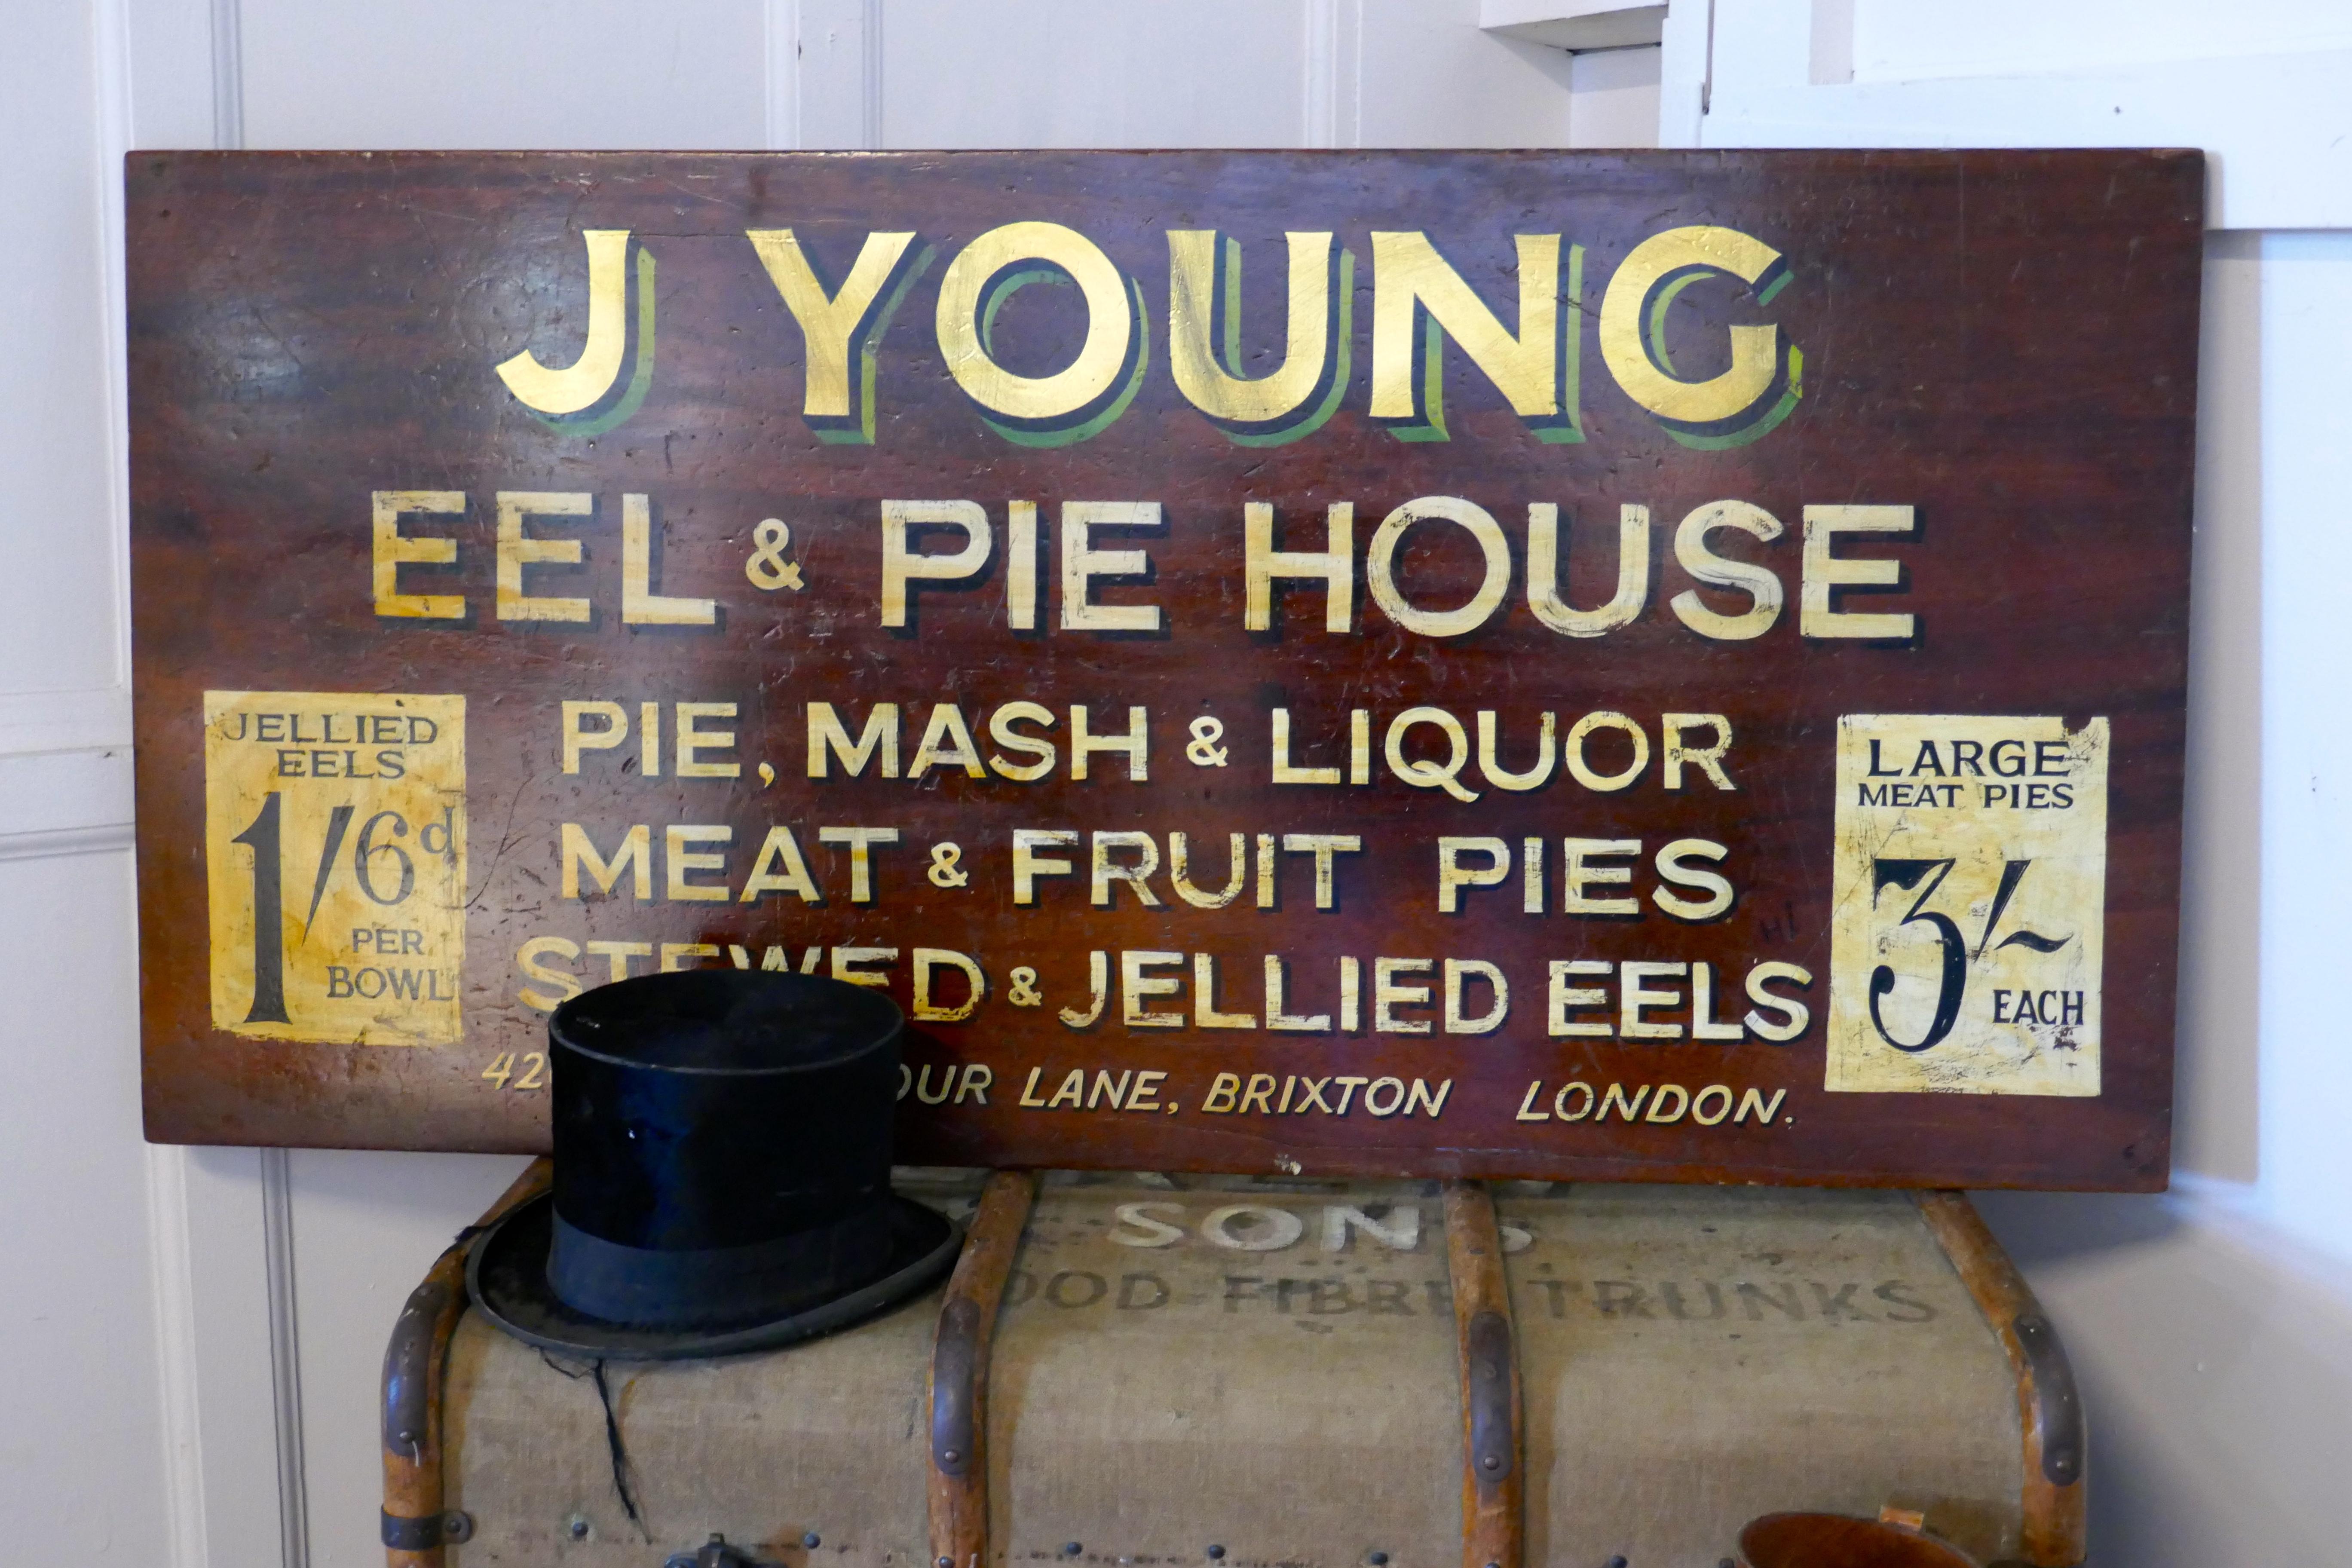 Large decorative painted advertising Sign, Eel and Pie shop

A great decorative piece, the paint has a good crackly but still sound finish, the sign is painted on a heavy piece of solid mahogany, if the prices quoted are anything to go by the sign